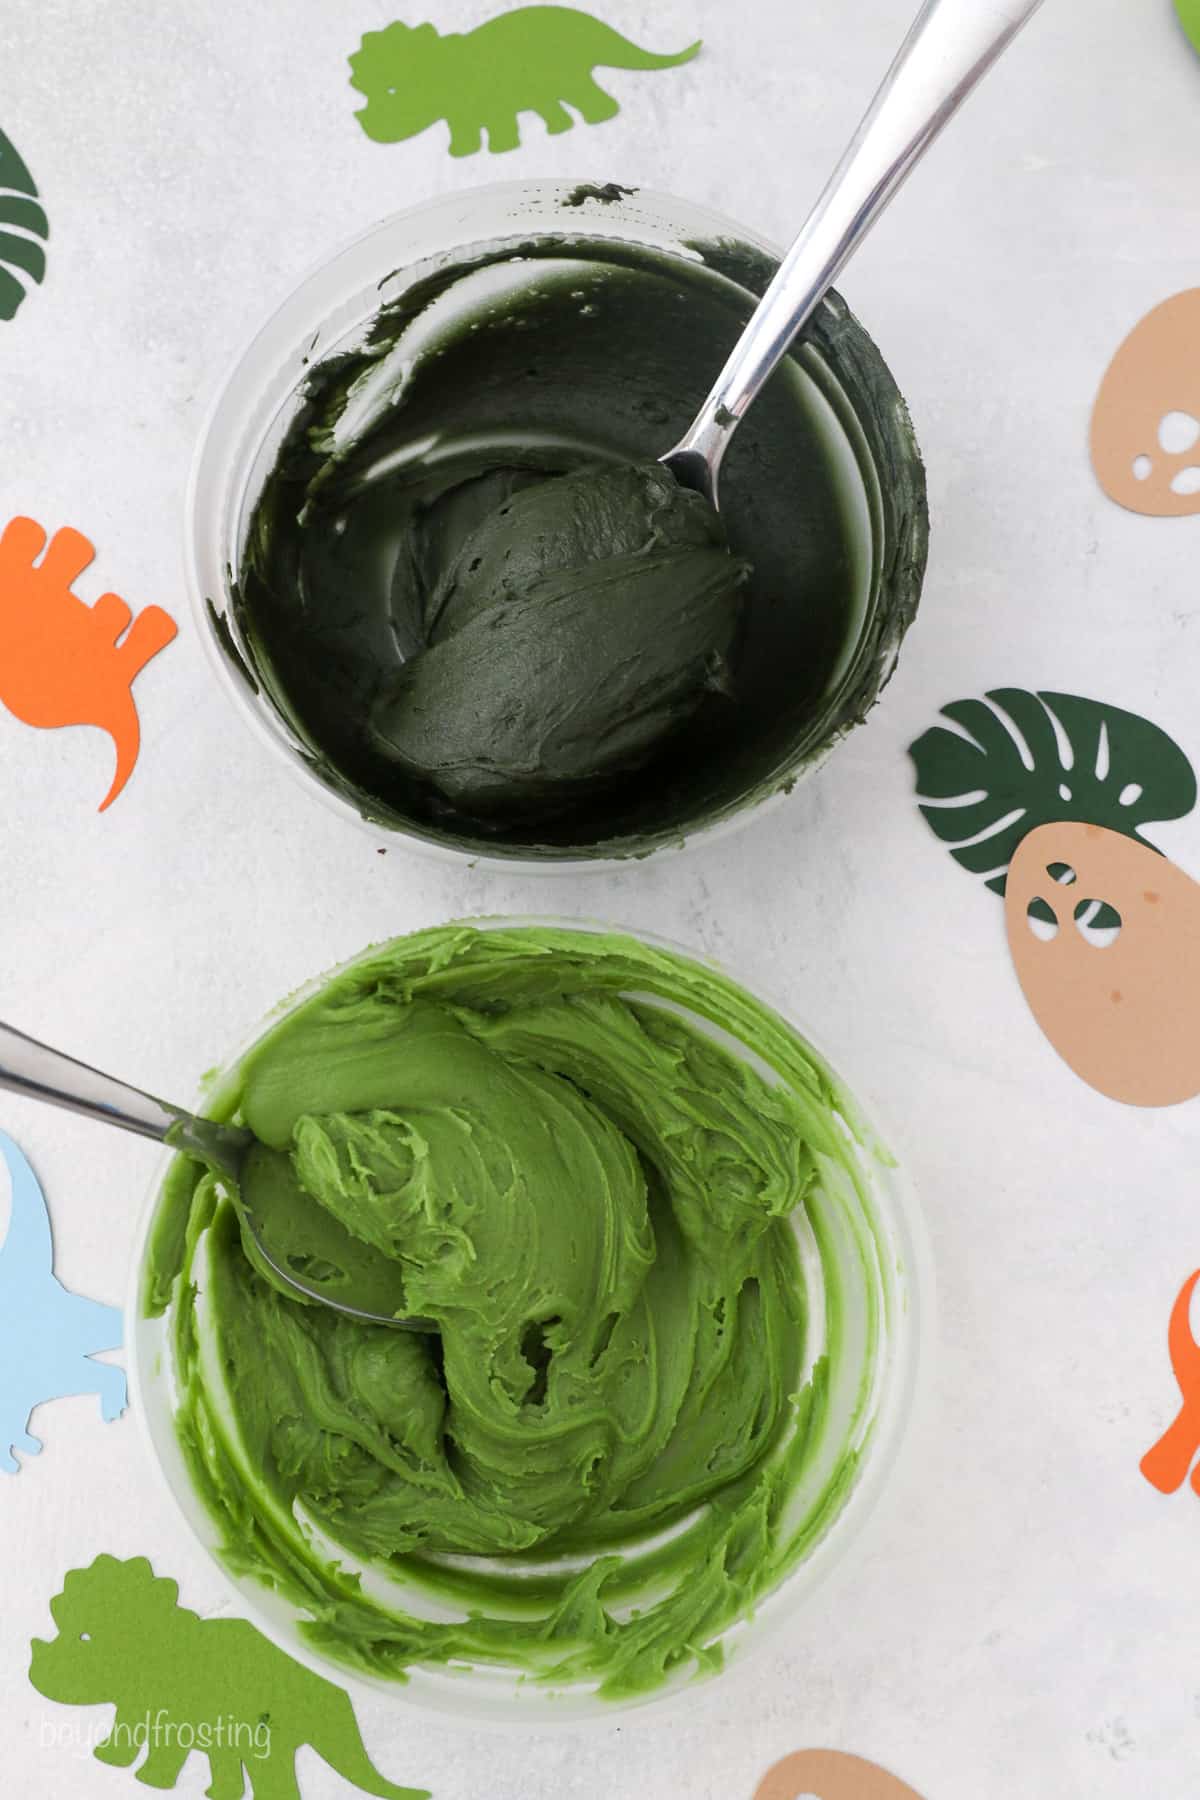 Overhead view of two bowls of frosting dyed dark and lighter shades of green.